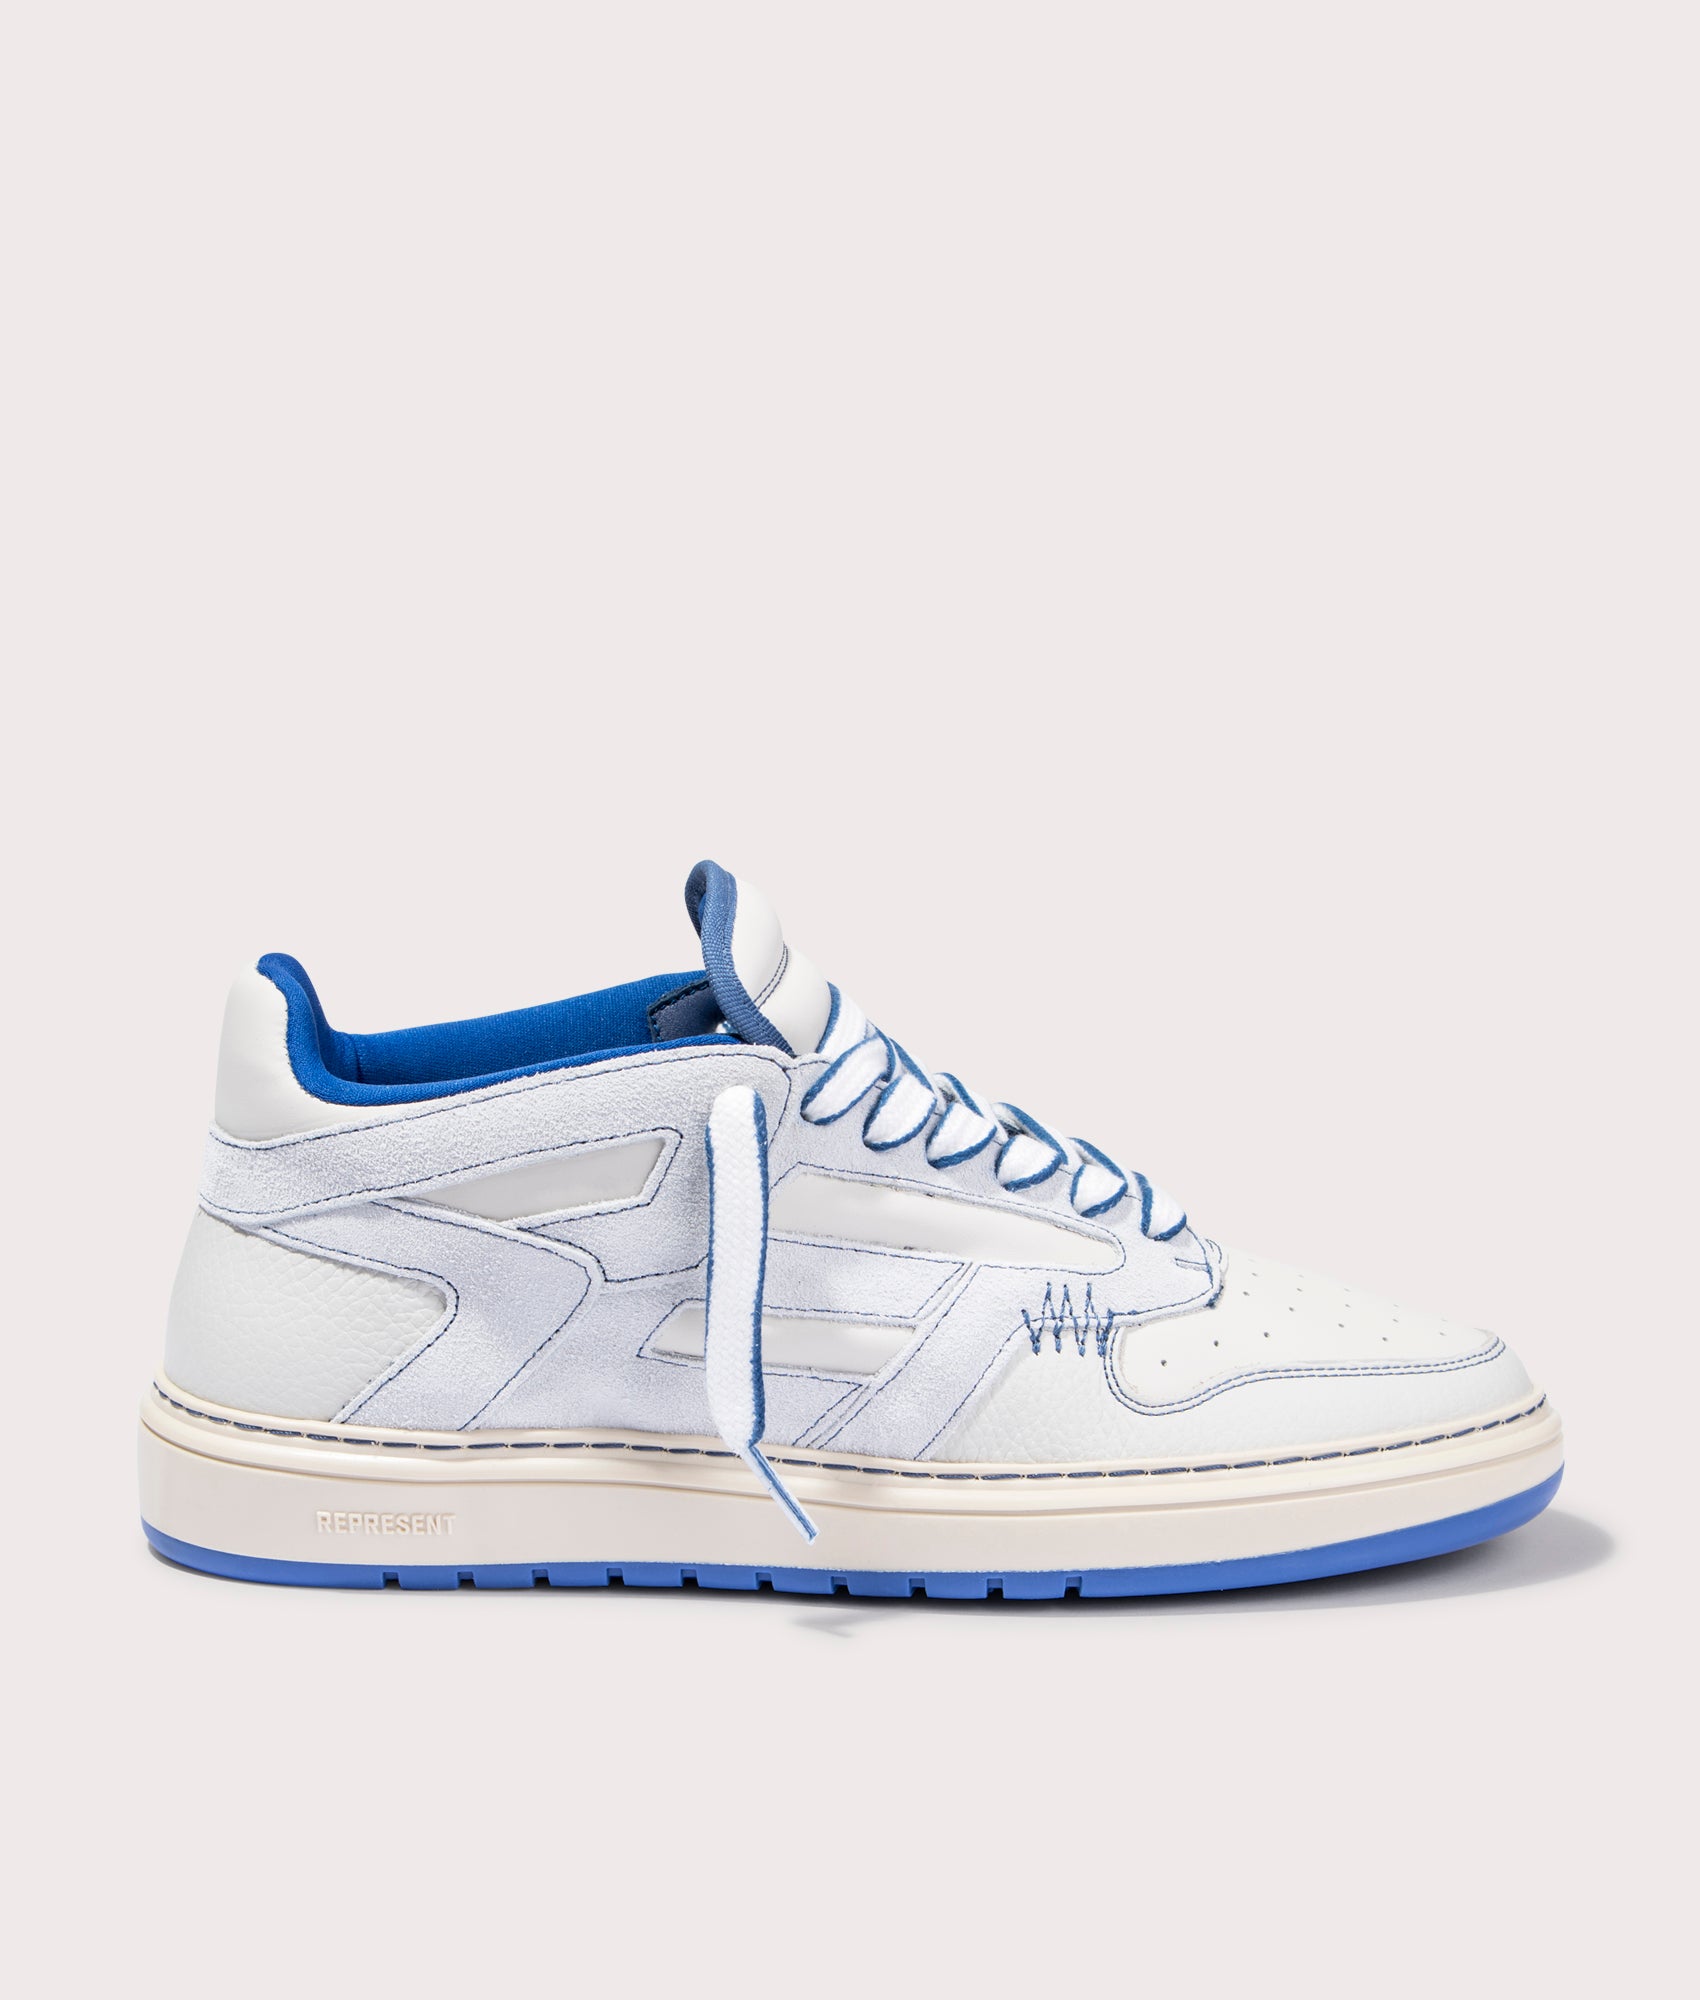 Represent Mens Reptor Sneakers - Colour: 453 Vintage White/Sky Blue - Size: 9